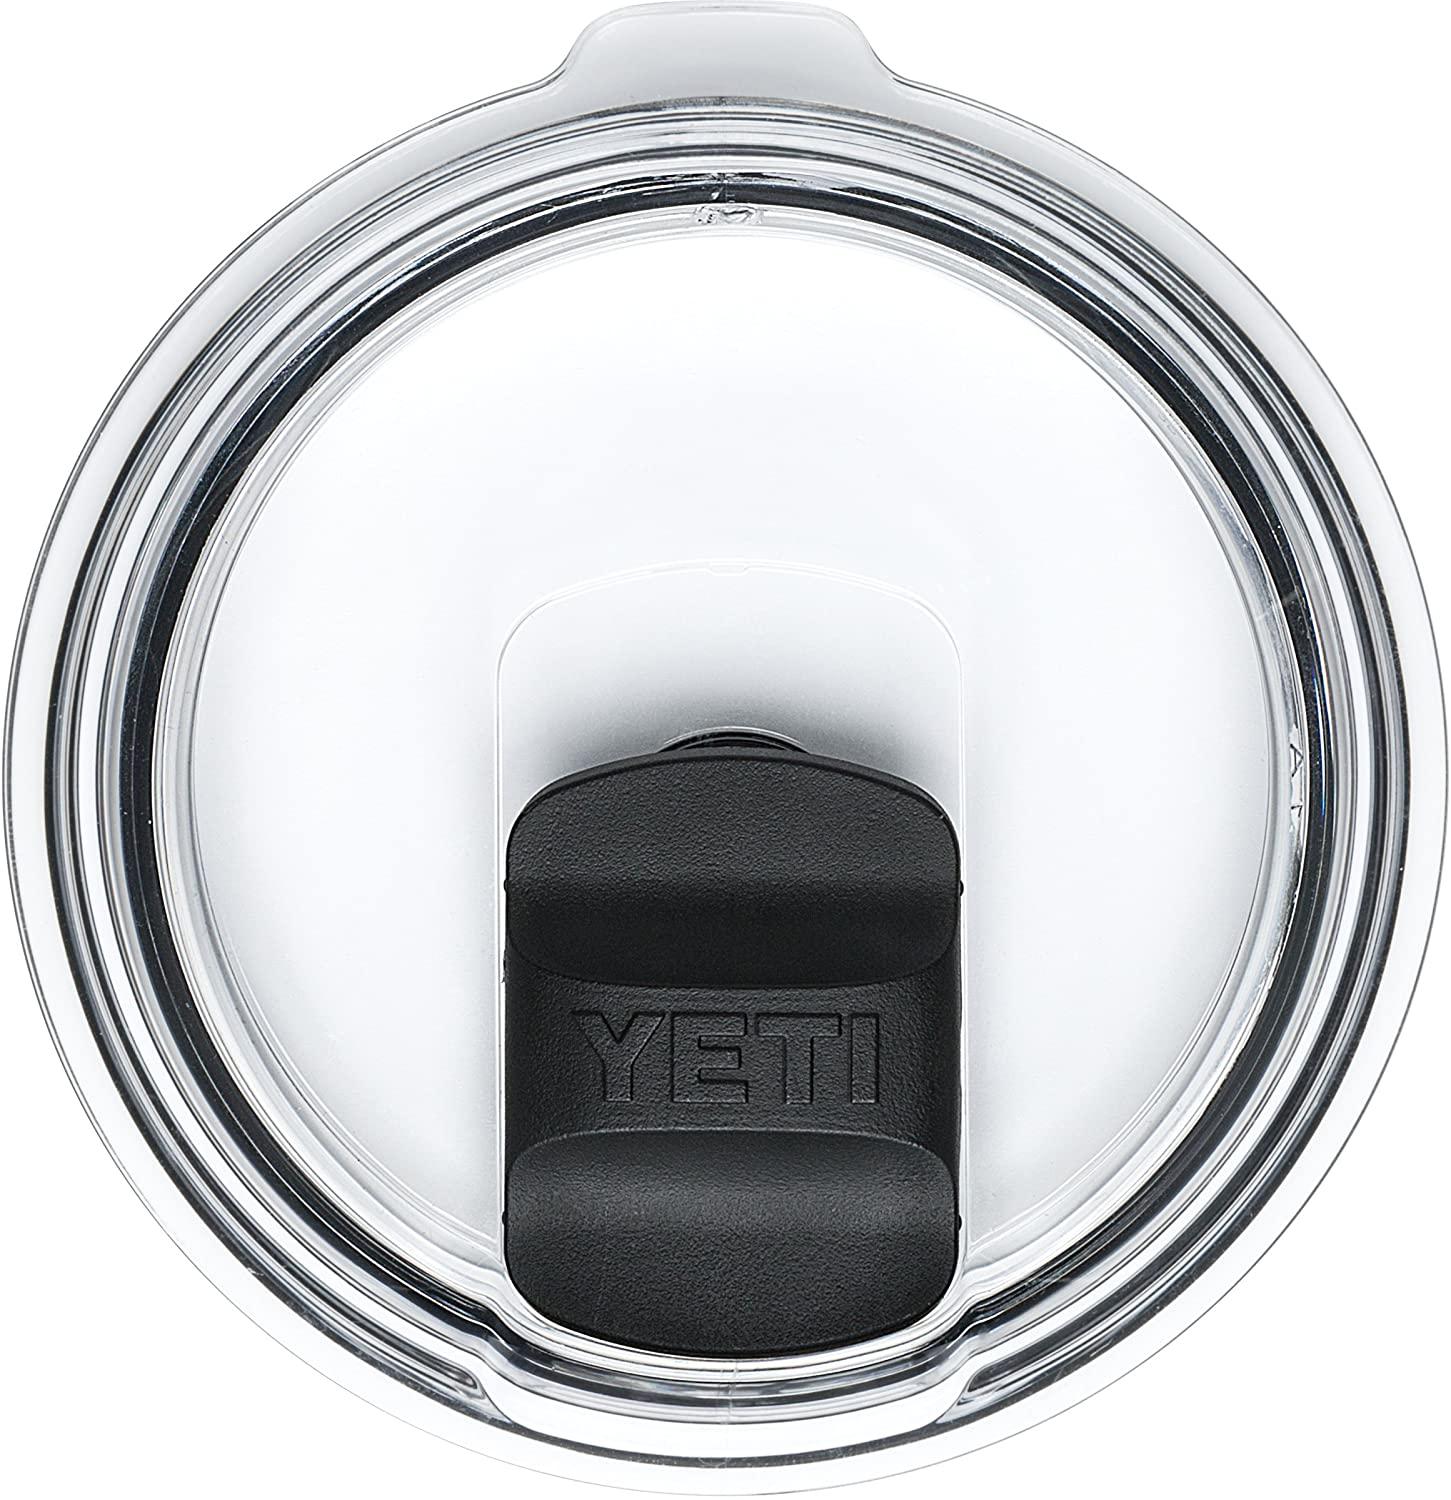 For Yeti Replacement Lids 20oz/30oz Tumblers, Spill Proof Magnetic